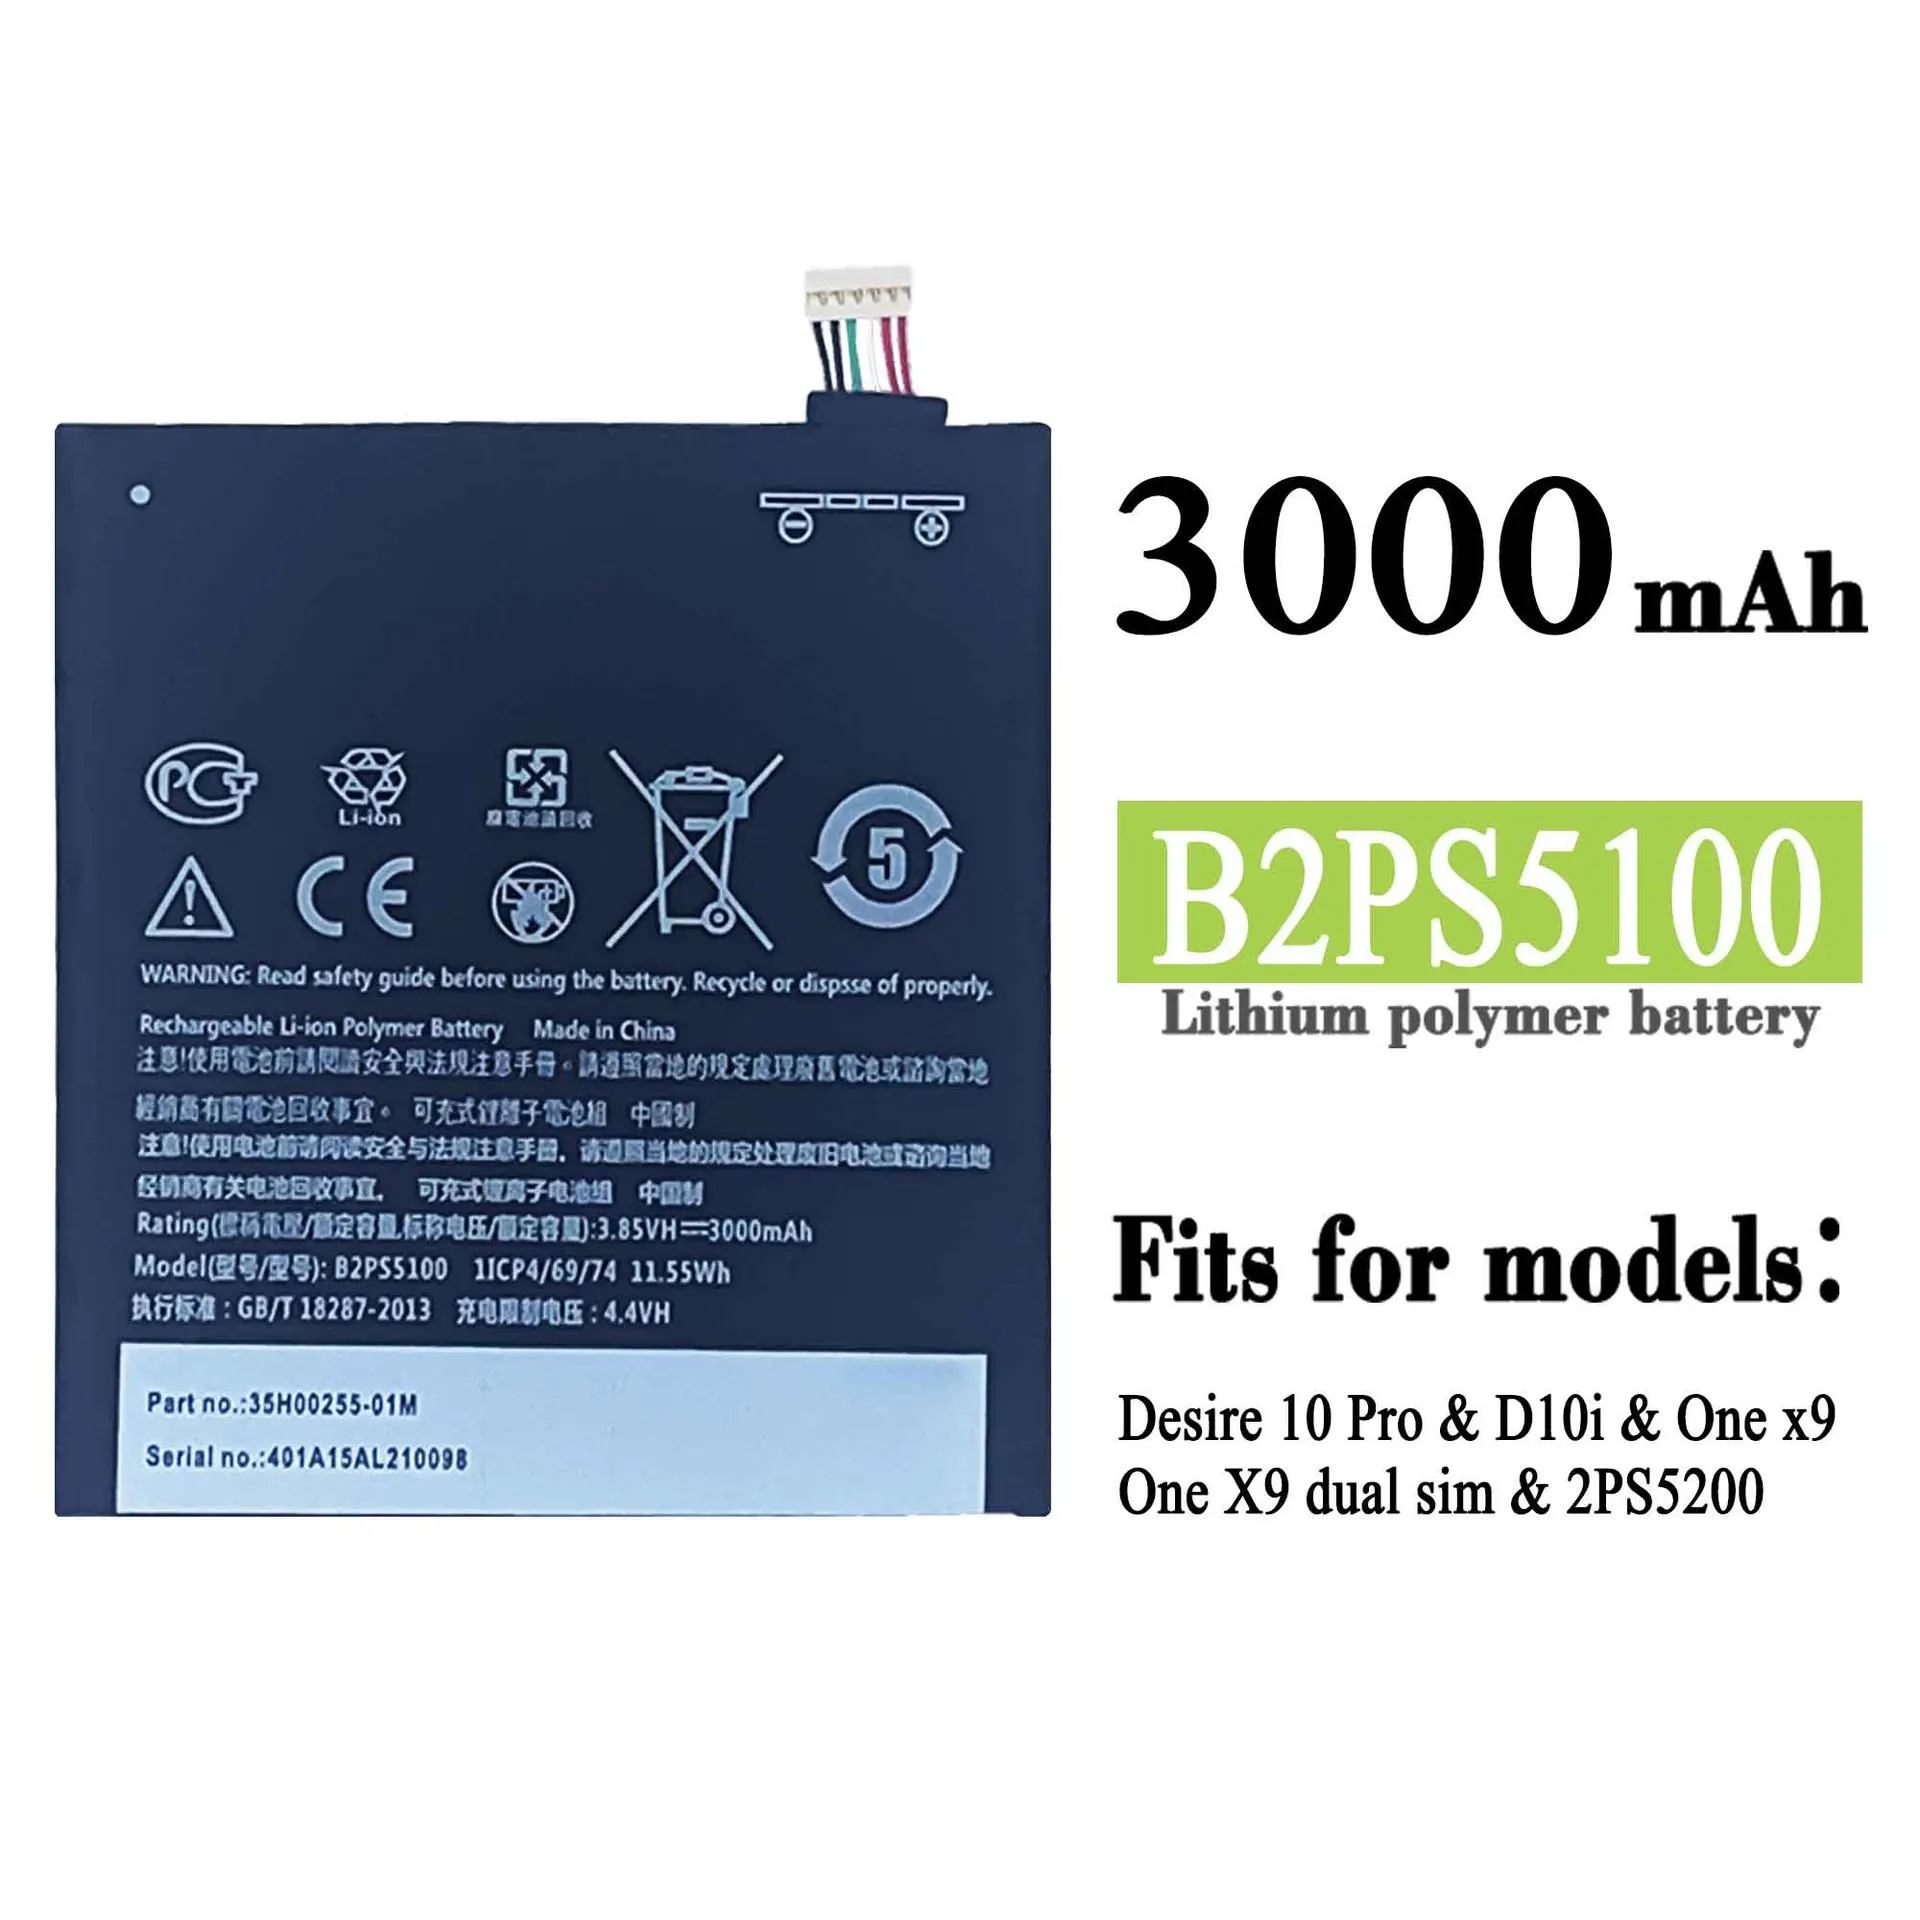 

B2PS5100 Orginal Replacement Battery For HTC Desire 10 Pro D10i One x9 2PS5200 Large Capacity High Quality Latest Batteries